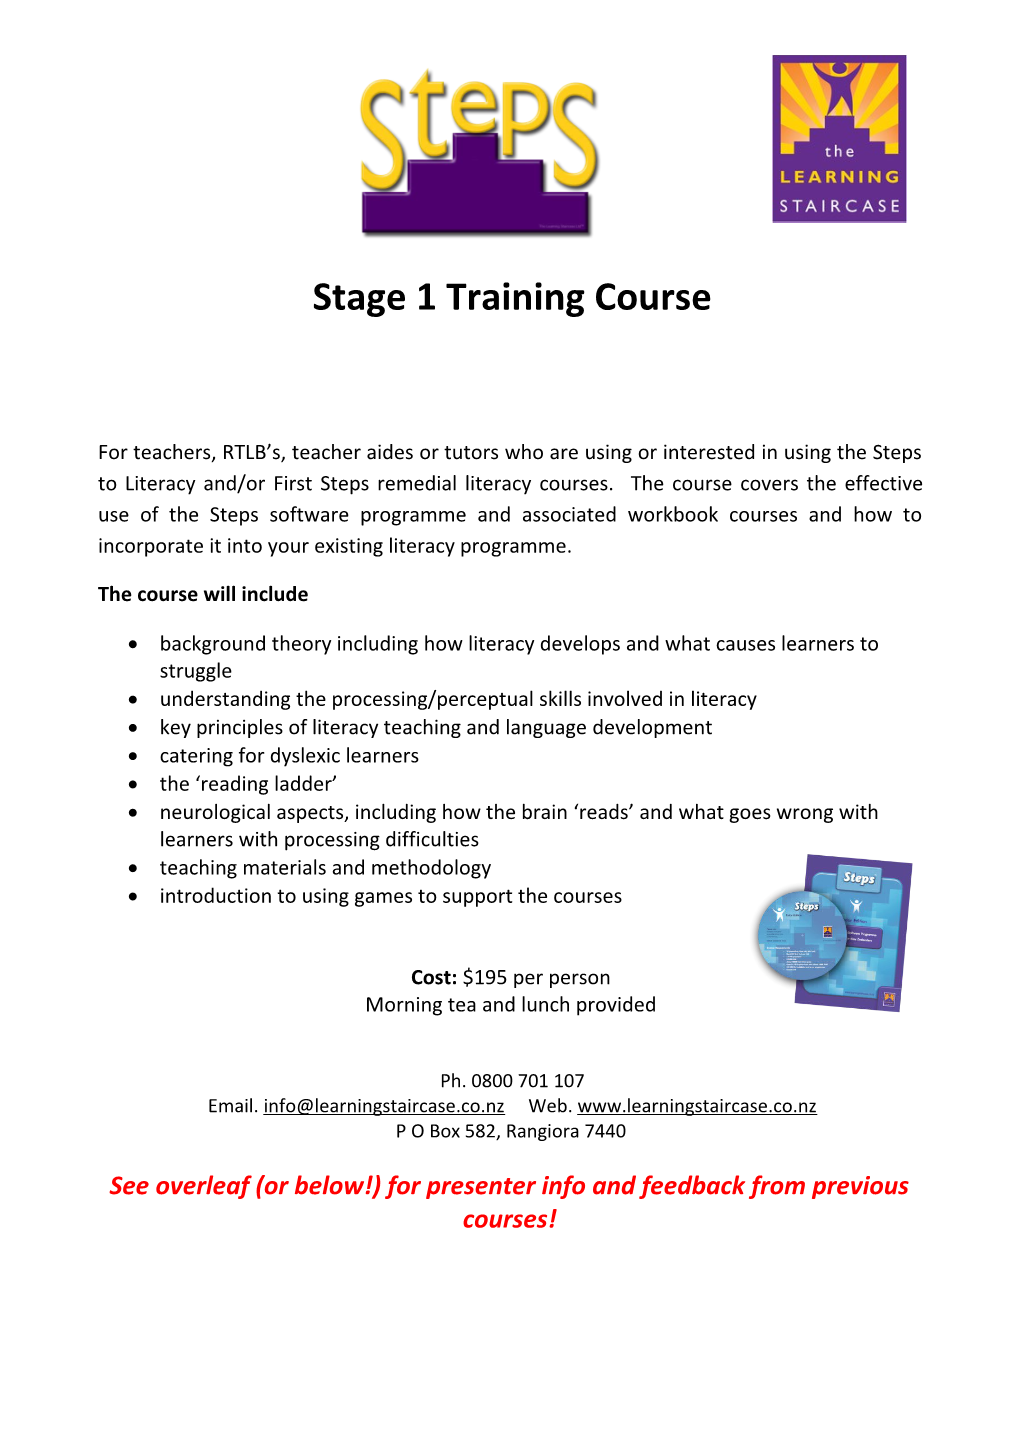 Stage 1 Training Course